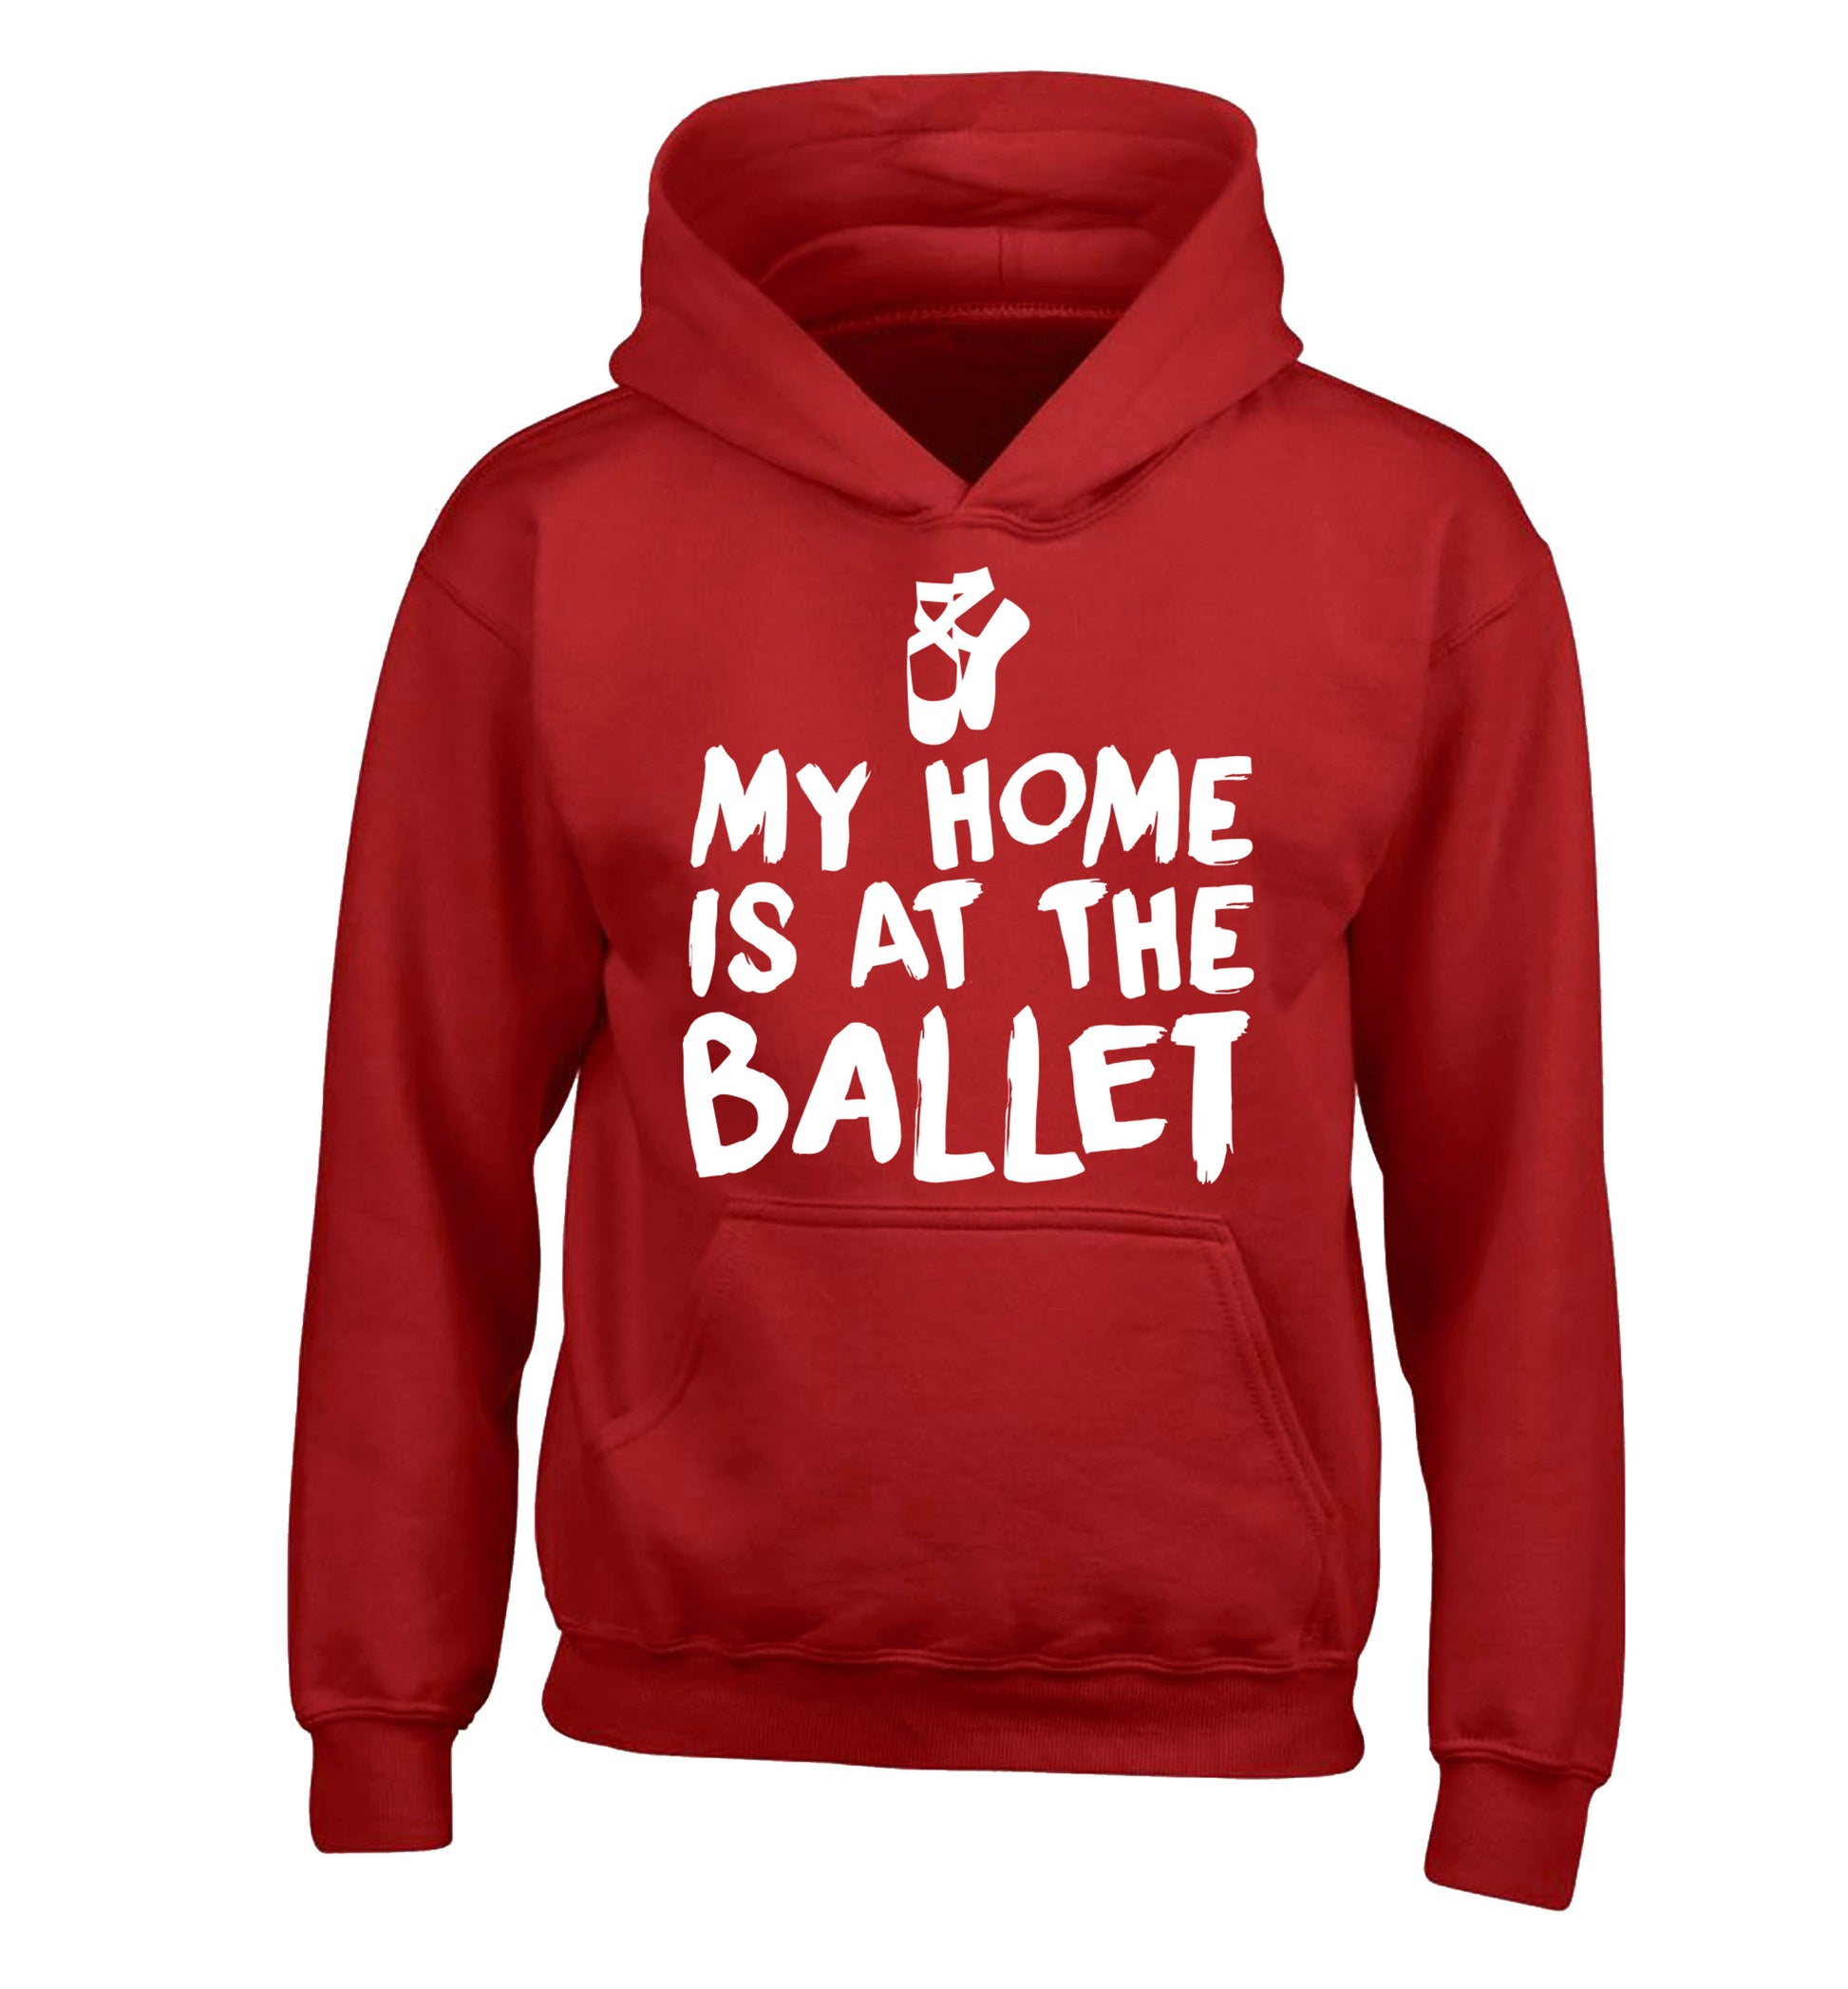 My home is at the ballet children's red hoodie 12-14 Years